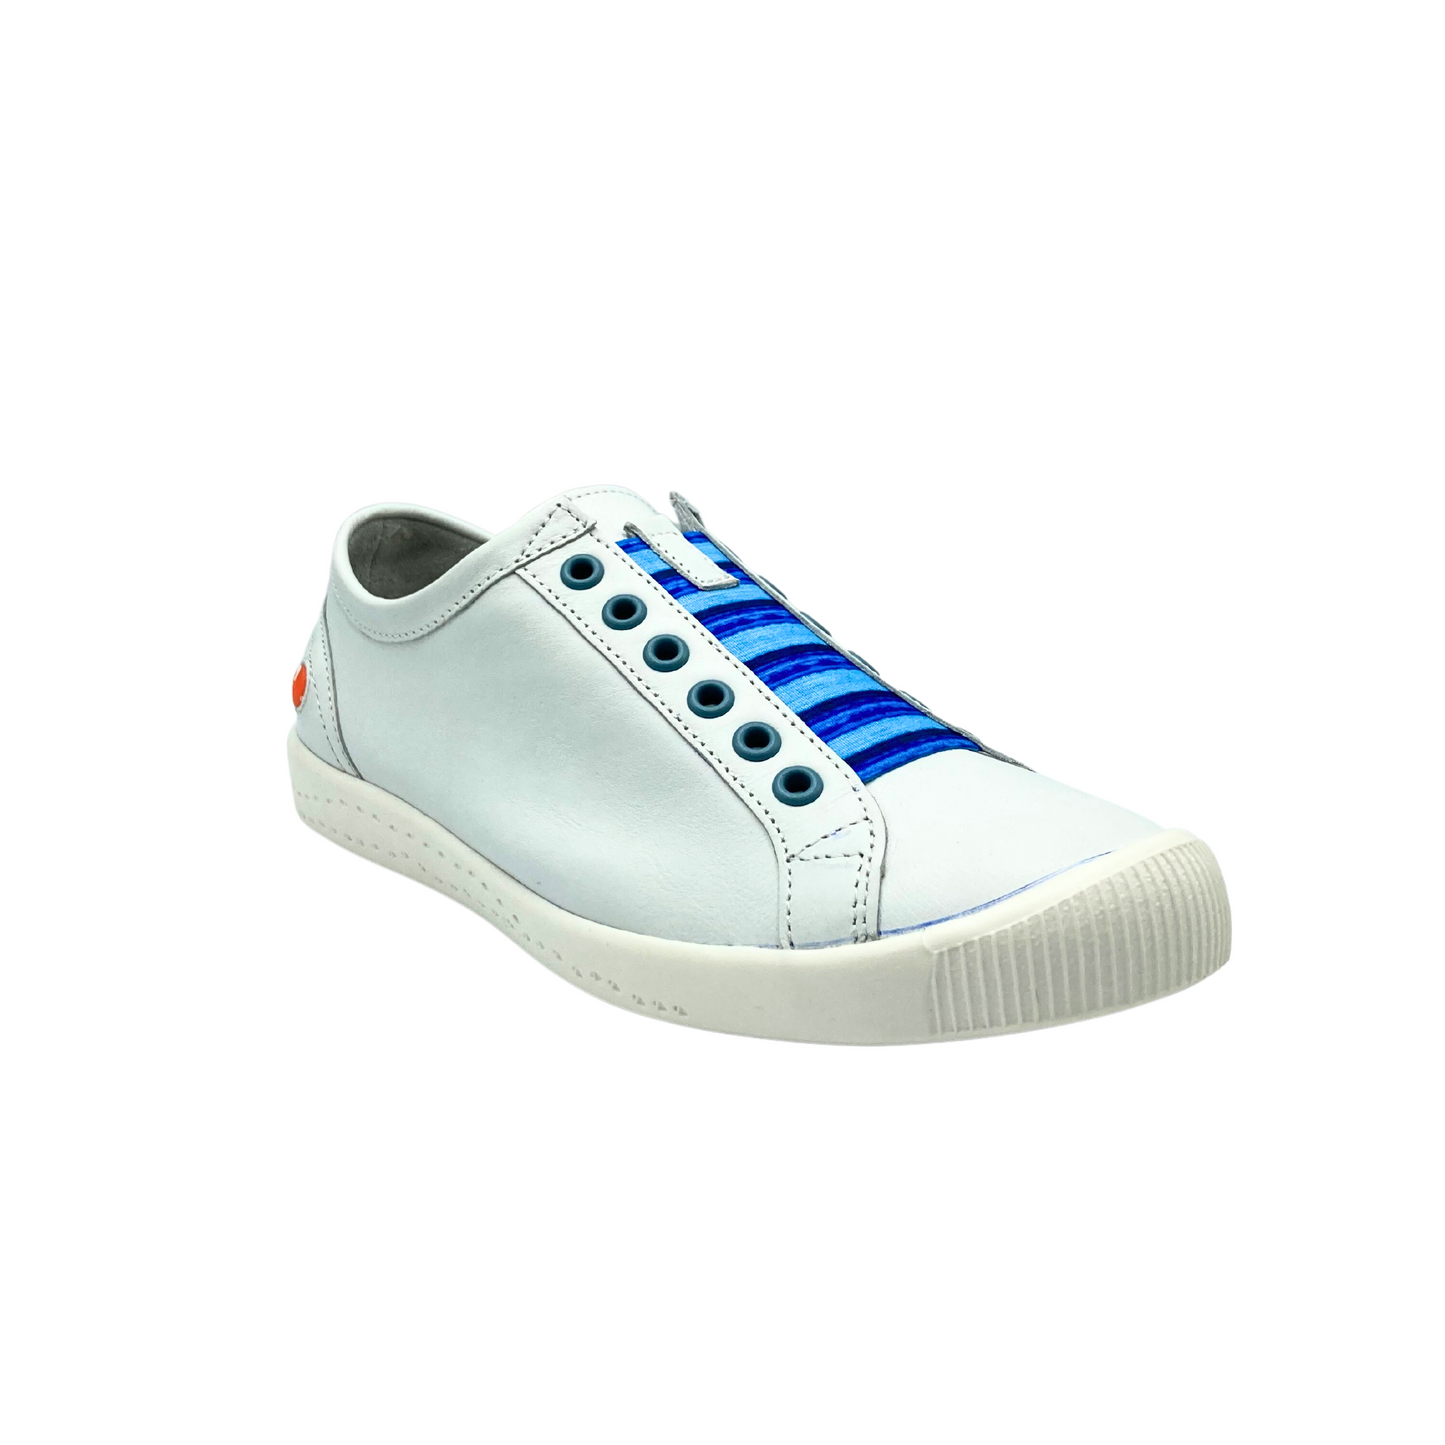 Angled front view of a white leather sneaker.  Slip on stle with elastic laces across the top.